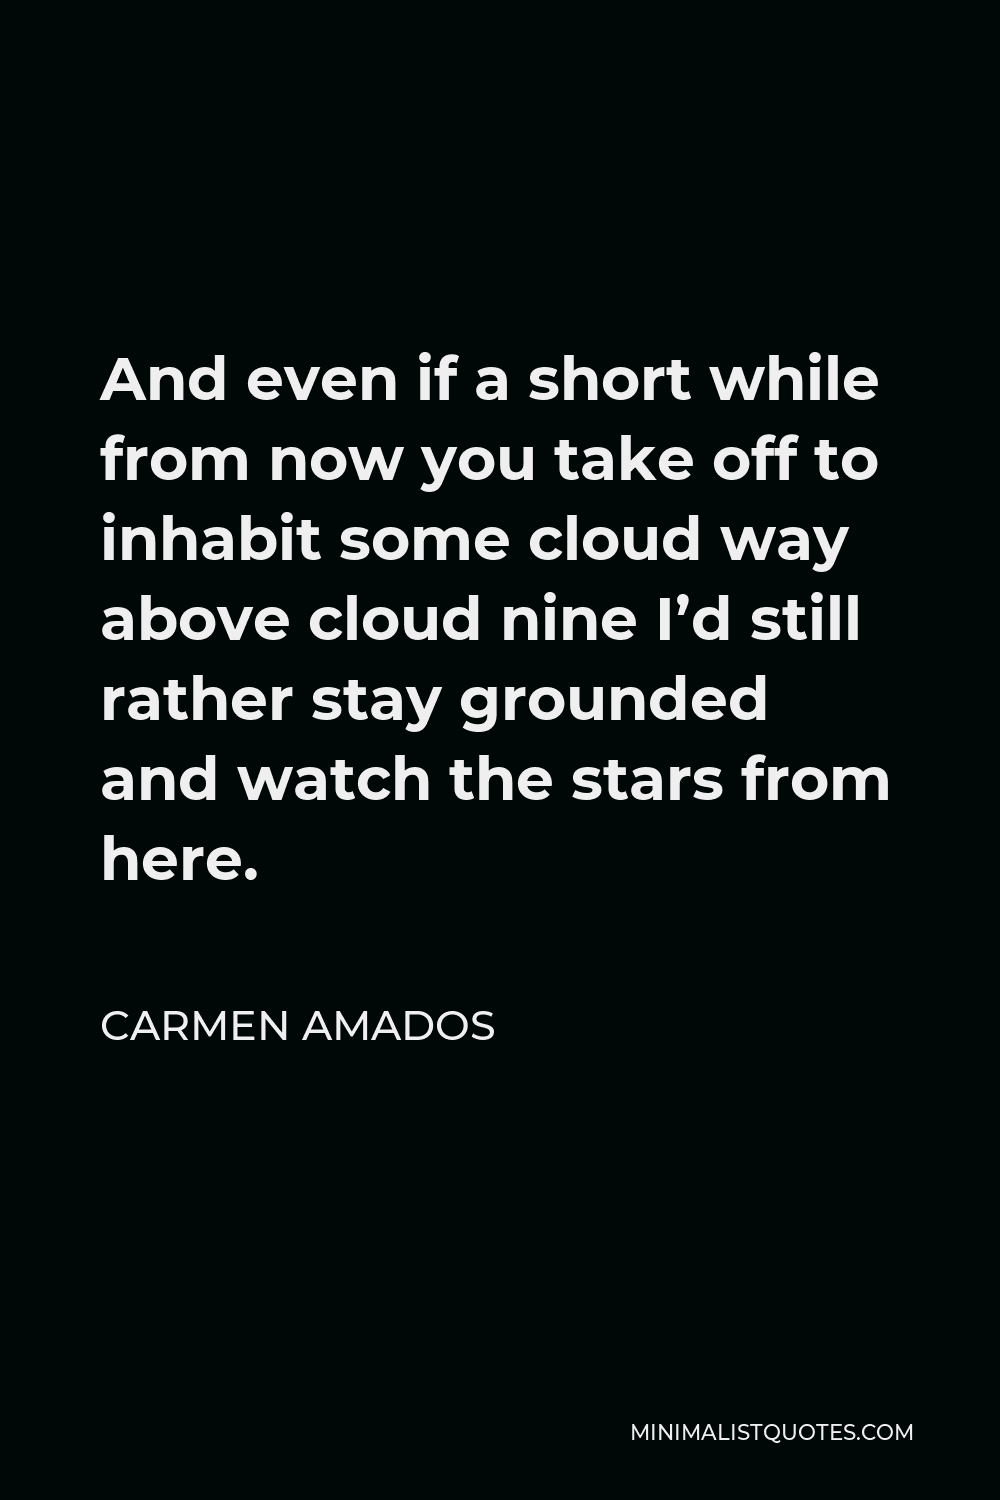 Carmen Amados Quote - And even if a short while from now you take off to inhabit some cloud way above cloud nine I’d still rather stay grounded and watch the stars from here.